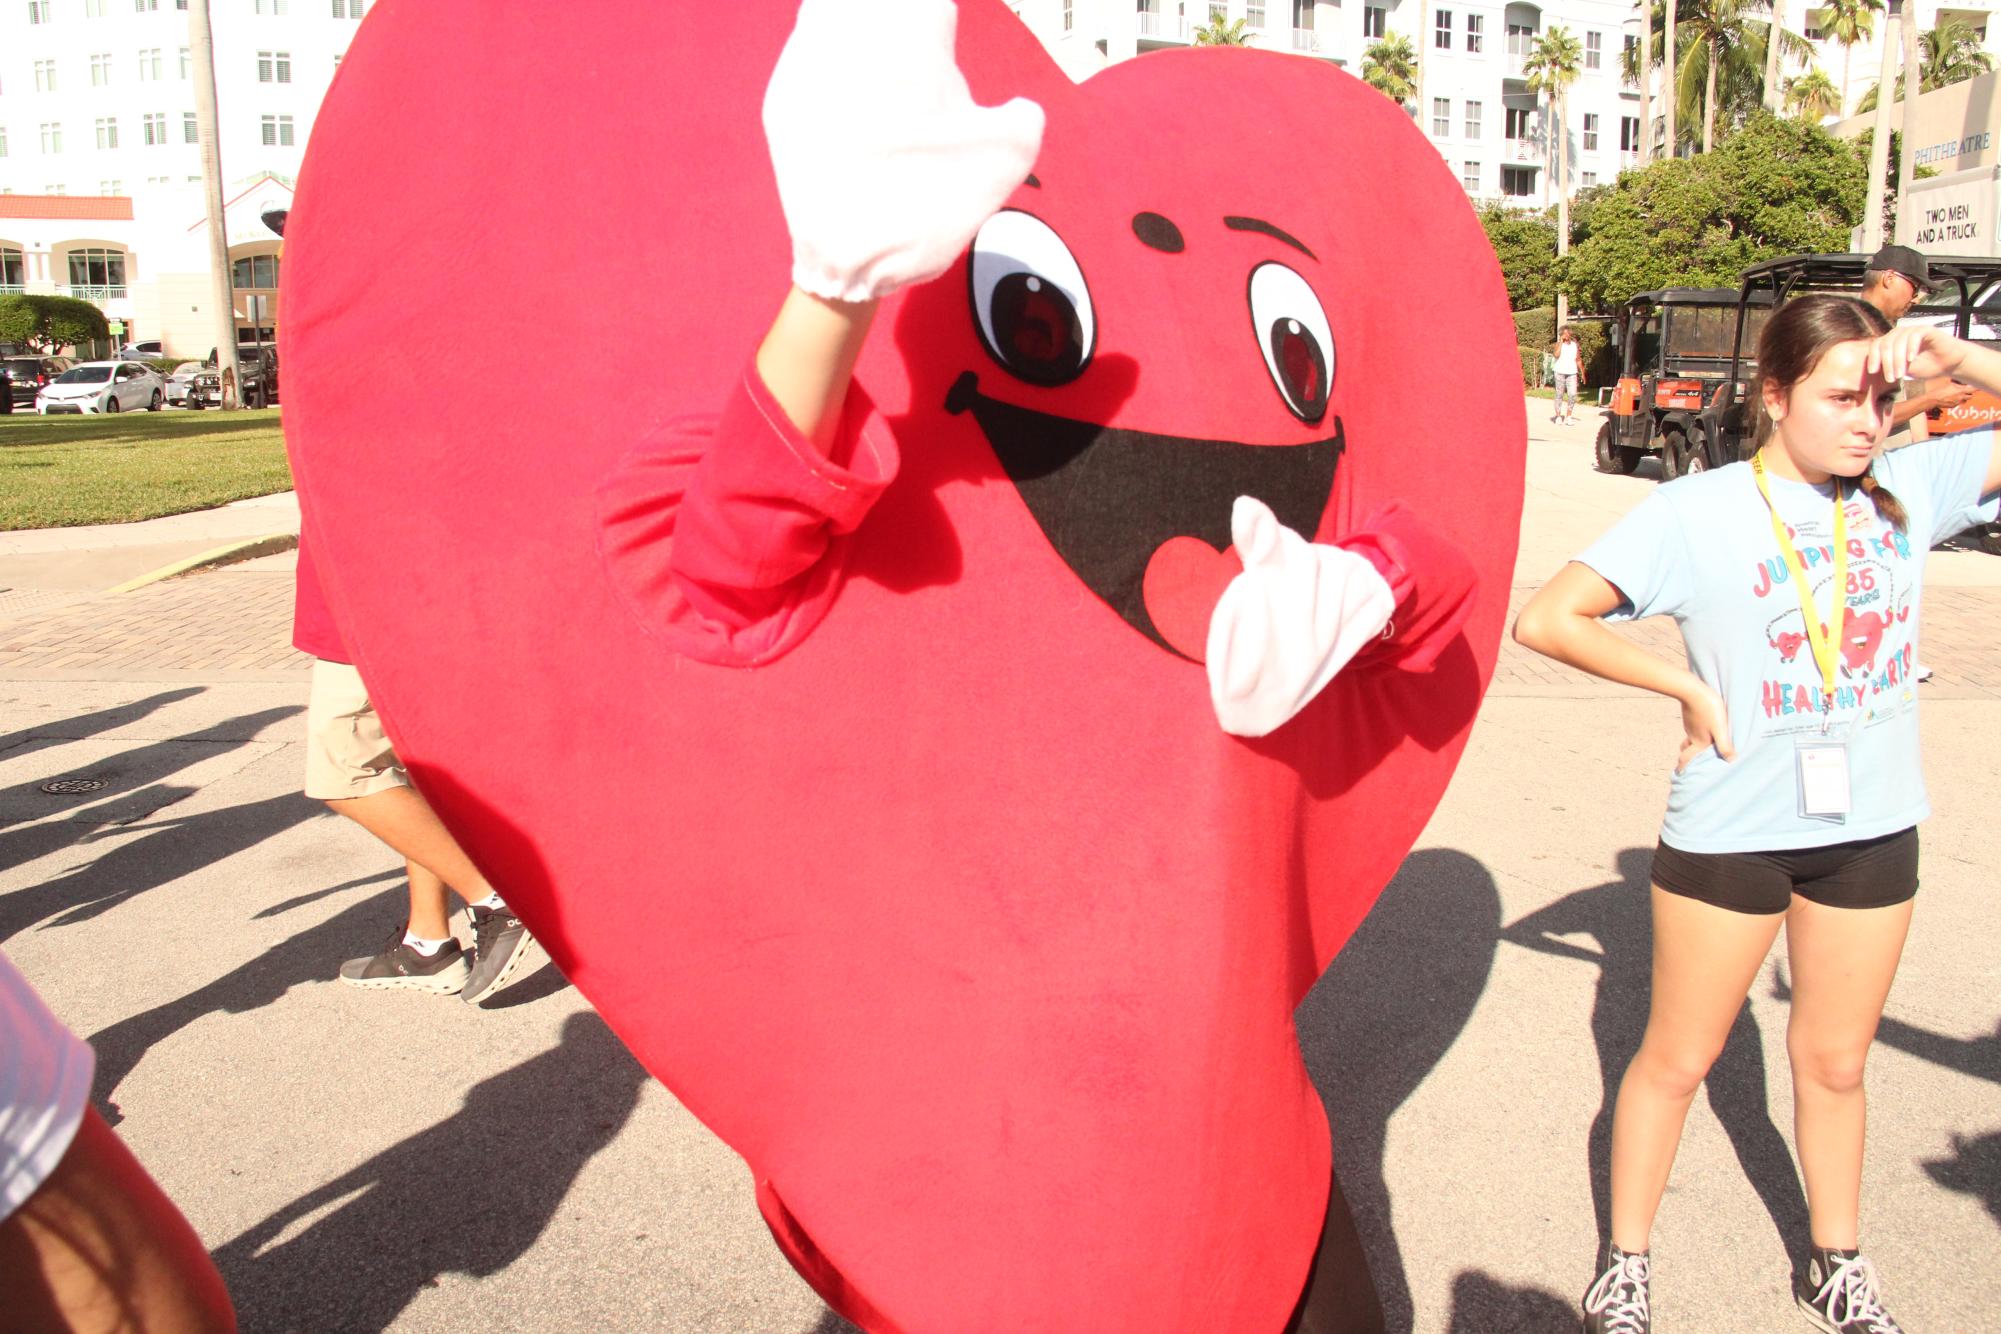 A picture of the heart mascot during the walk.